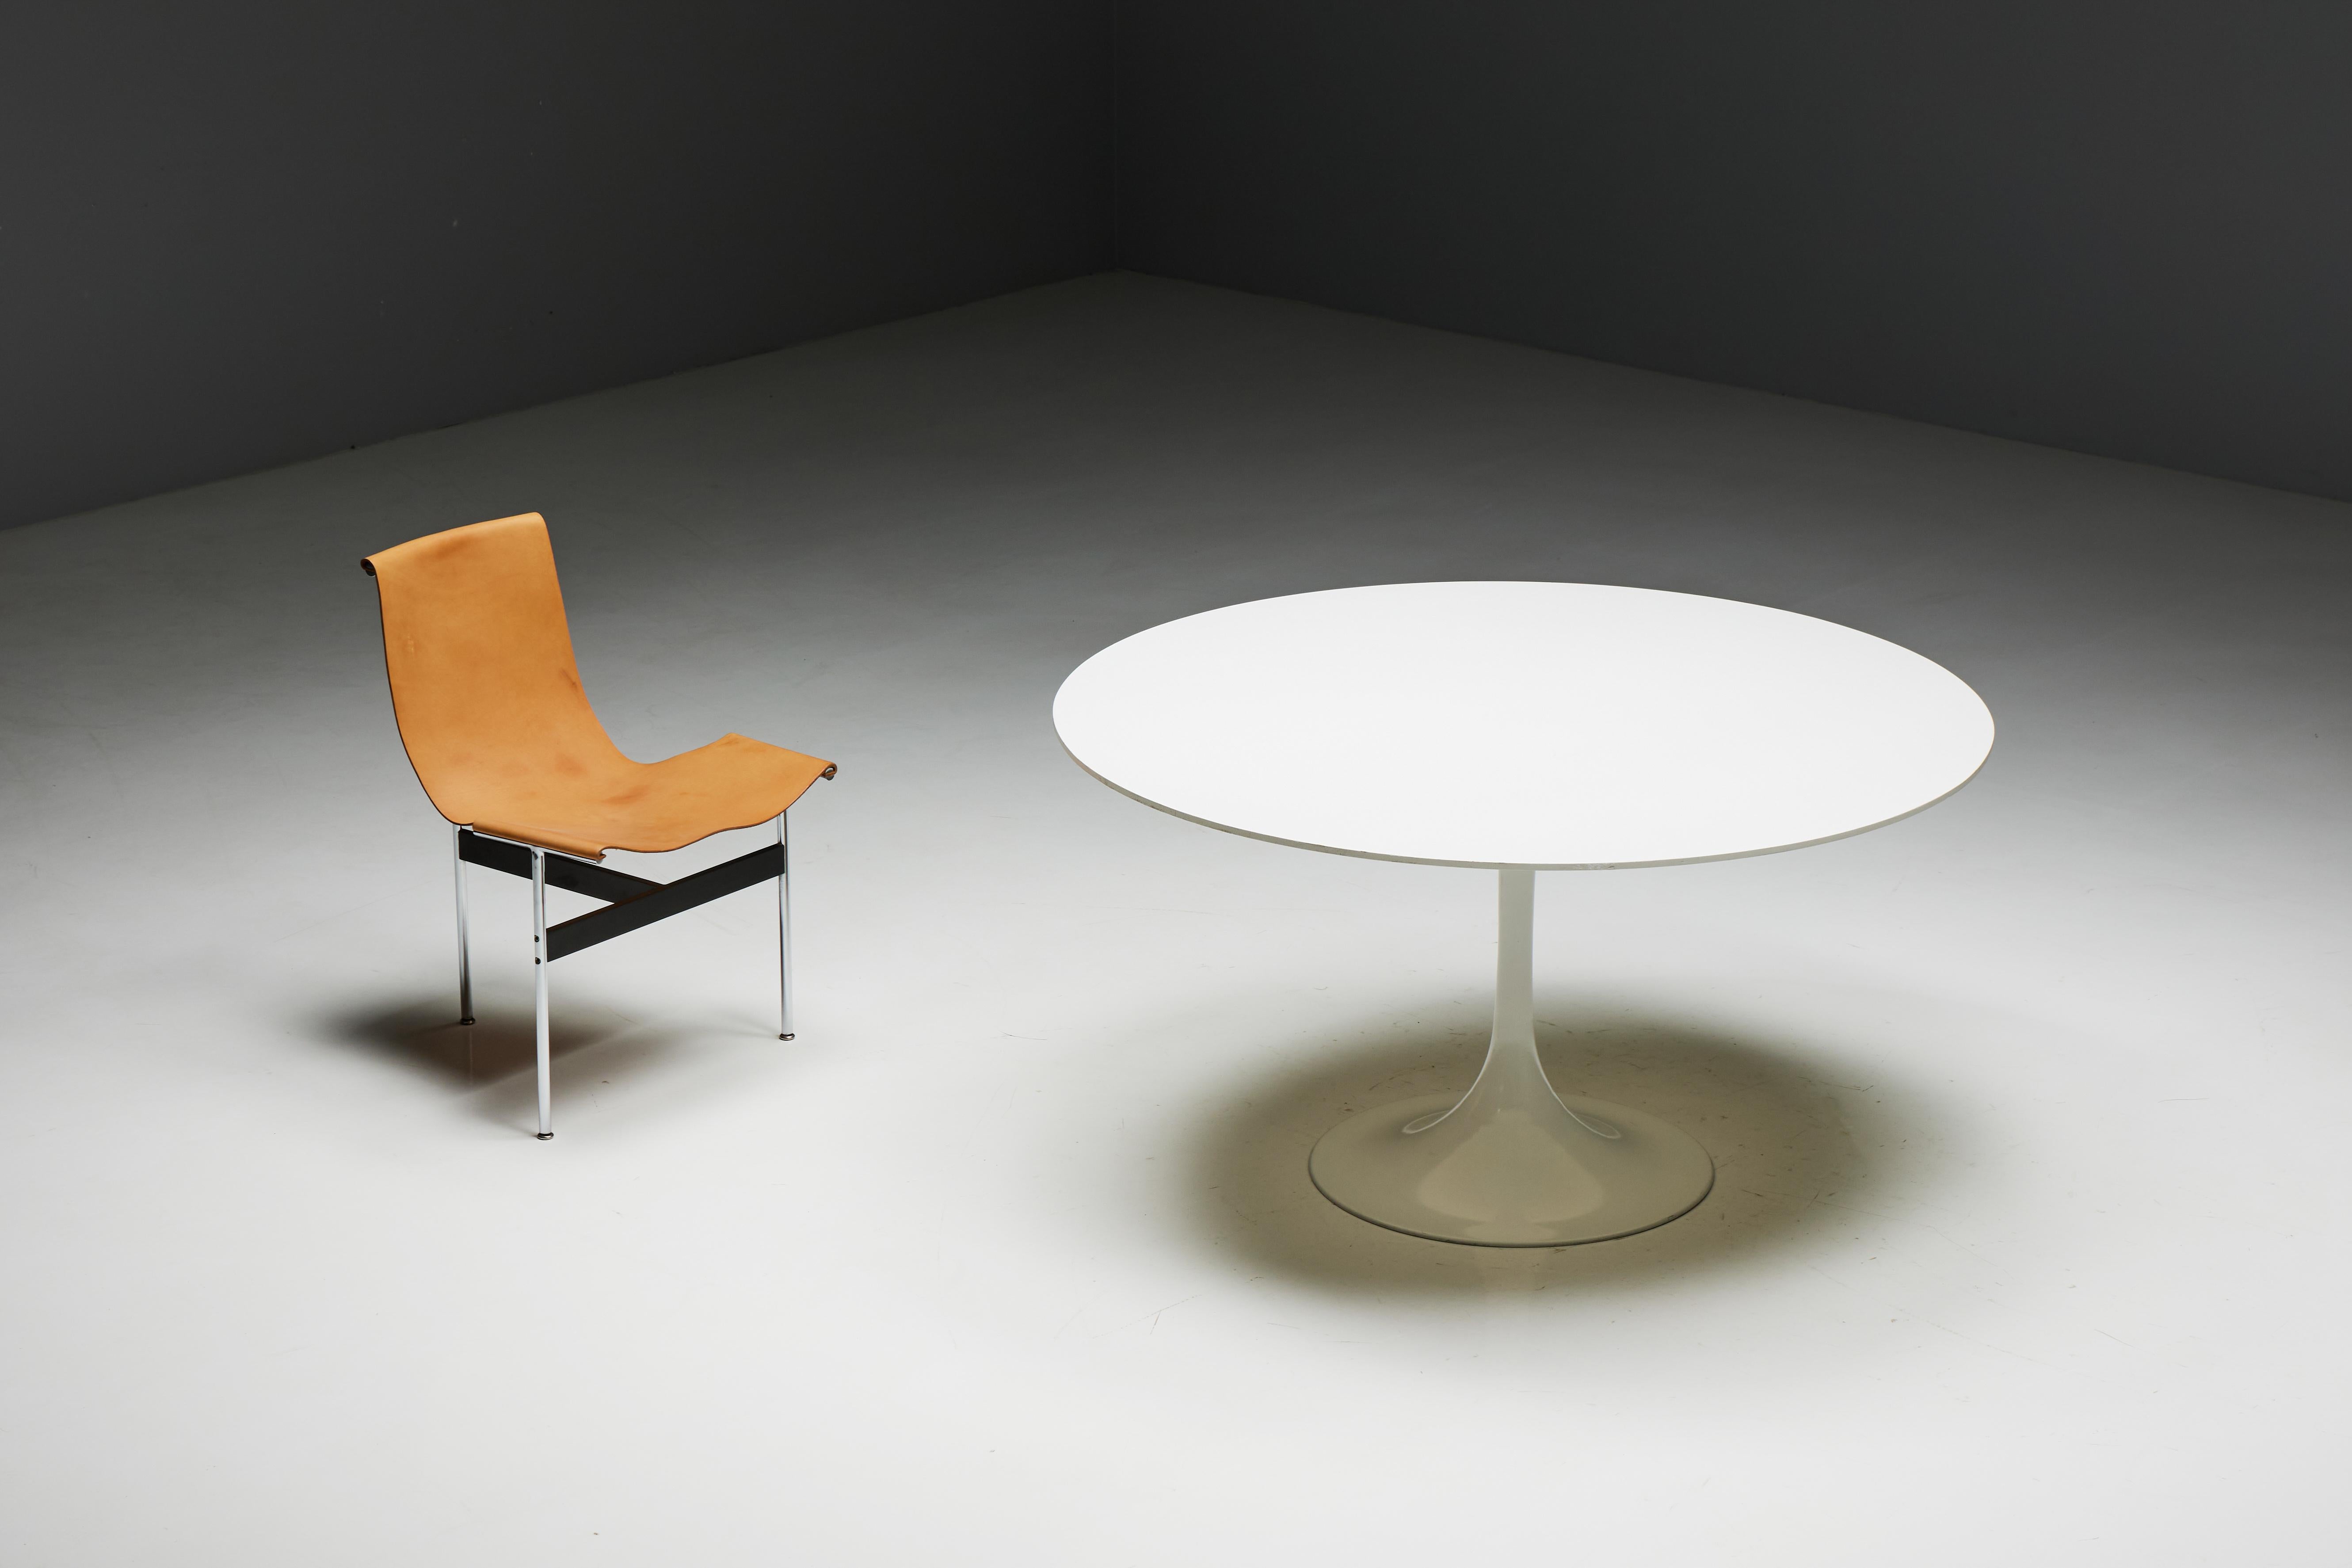 Round dining table by Eero Saarinen for Knoll International, originating in the United States in the 1970s. This table is crafted with an elegant aluminum tulip base and a sleek laminate top in pristine white. The spacious round design comfortably